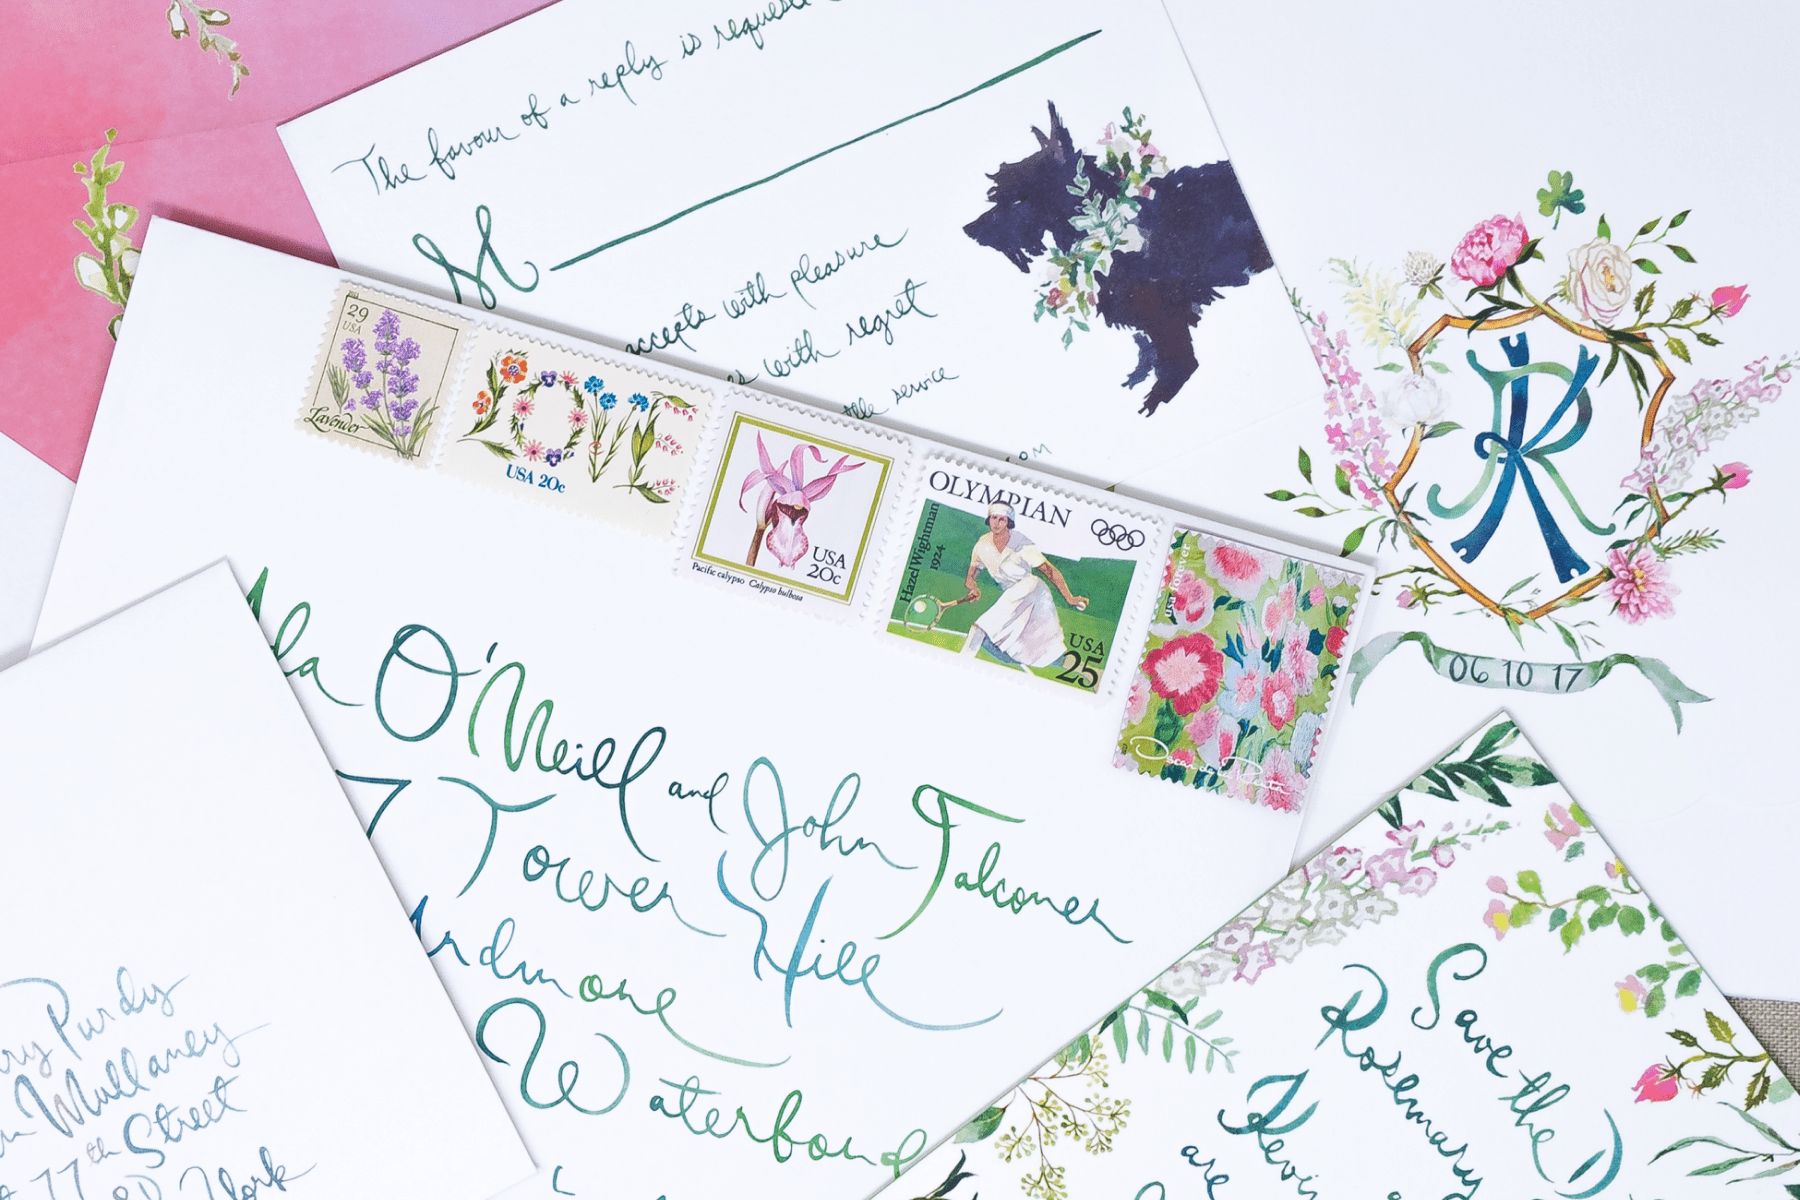 Details of a wedding invitation and envelope with hand-written words and address in ombre green and blue, with a Scottish terrier, floral crest, and several decorative stamps.